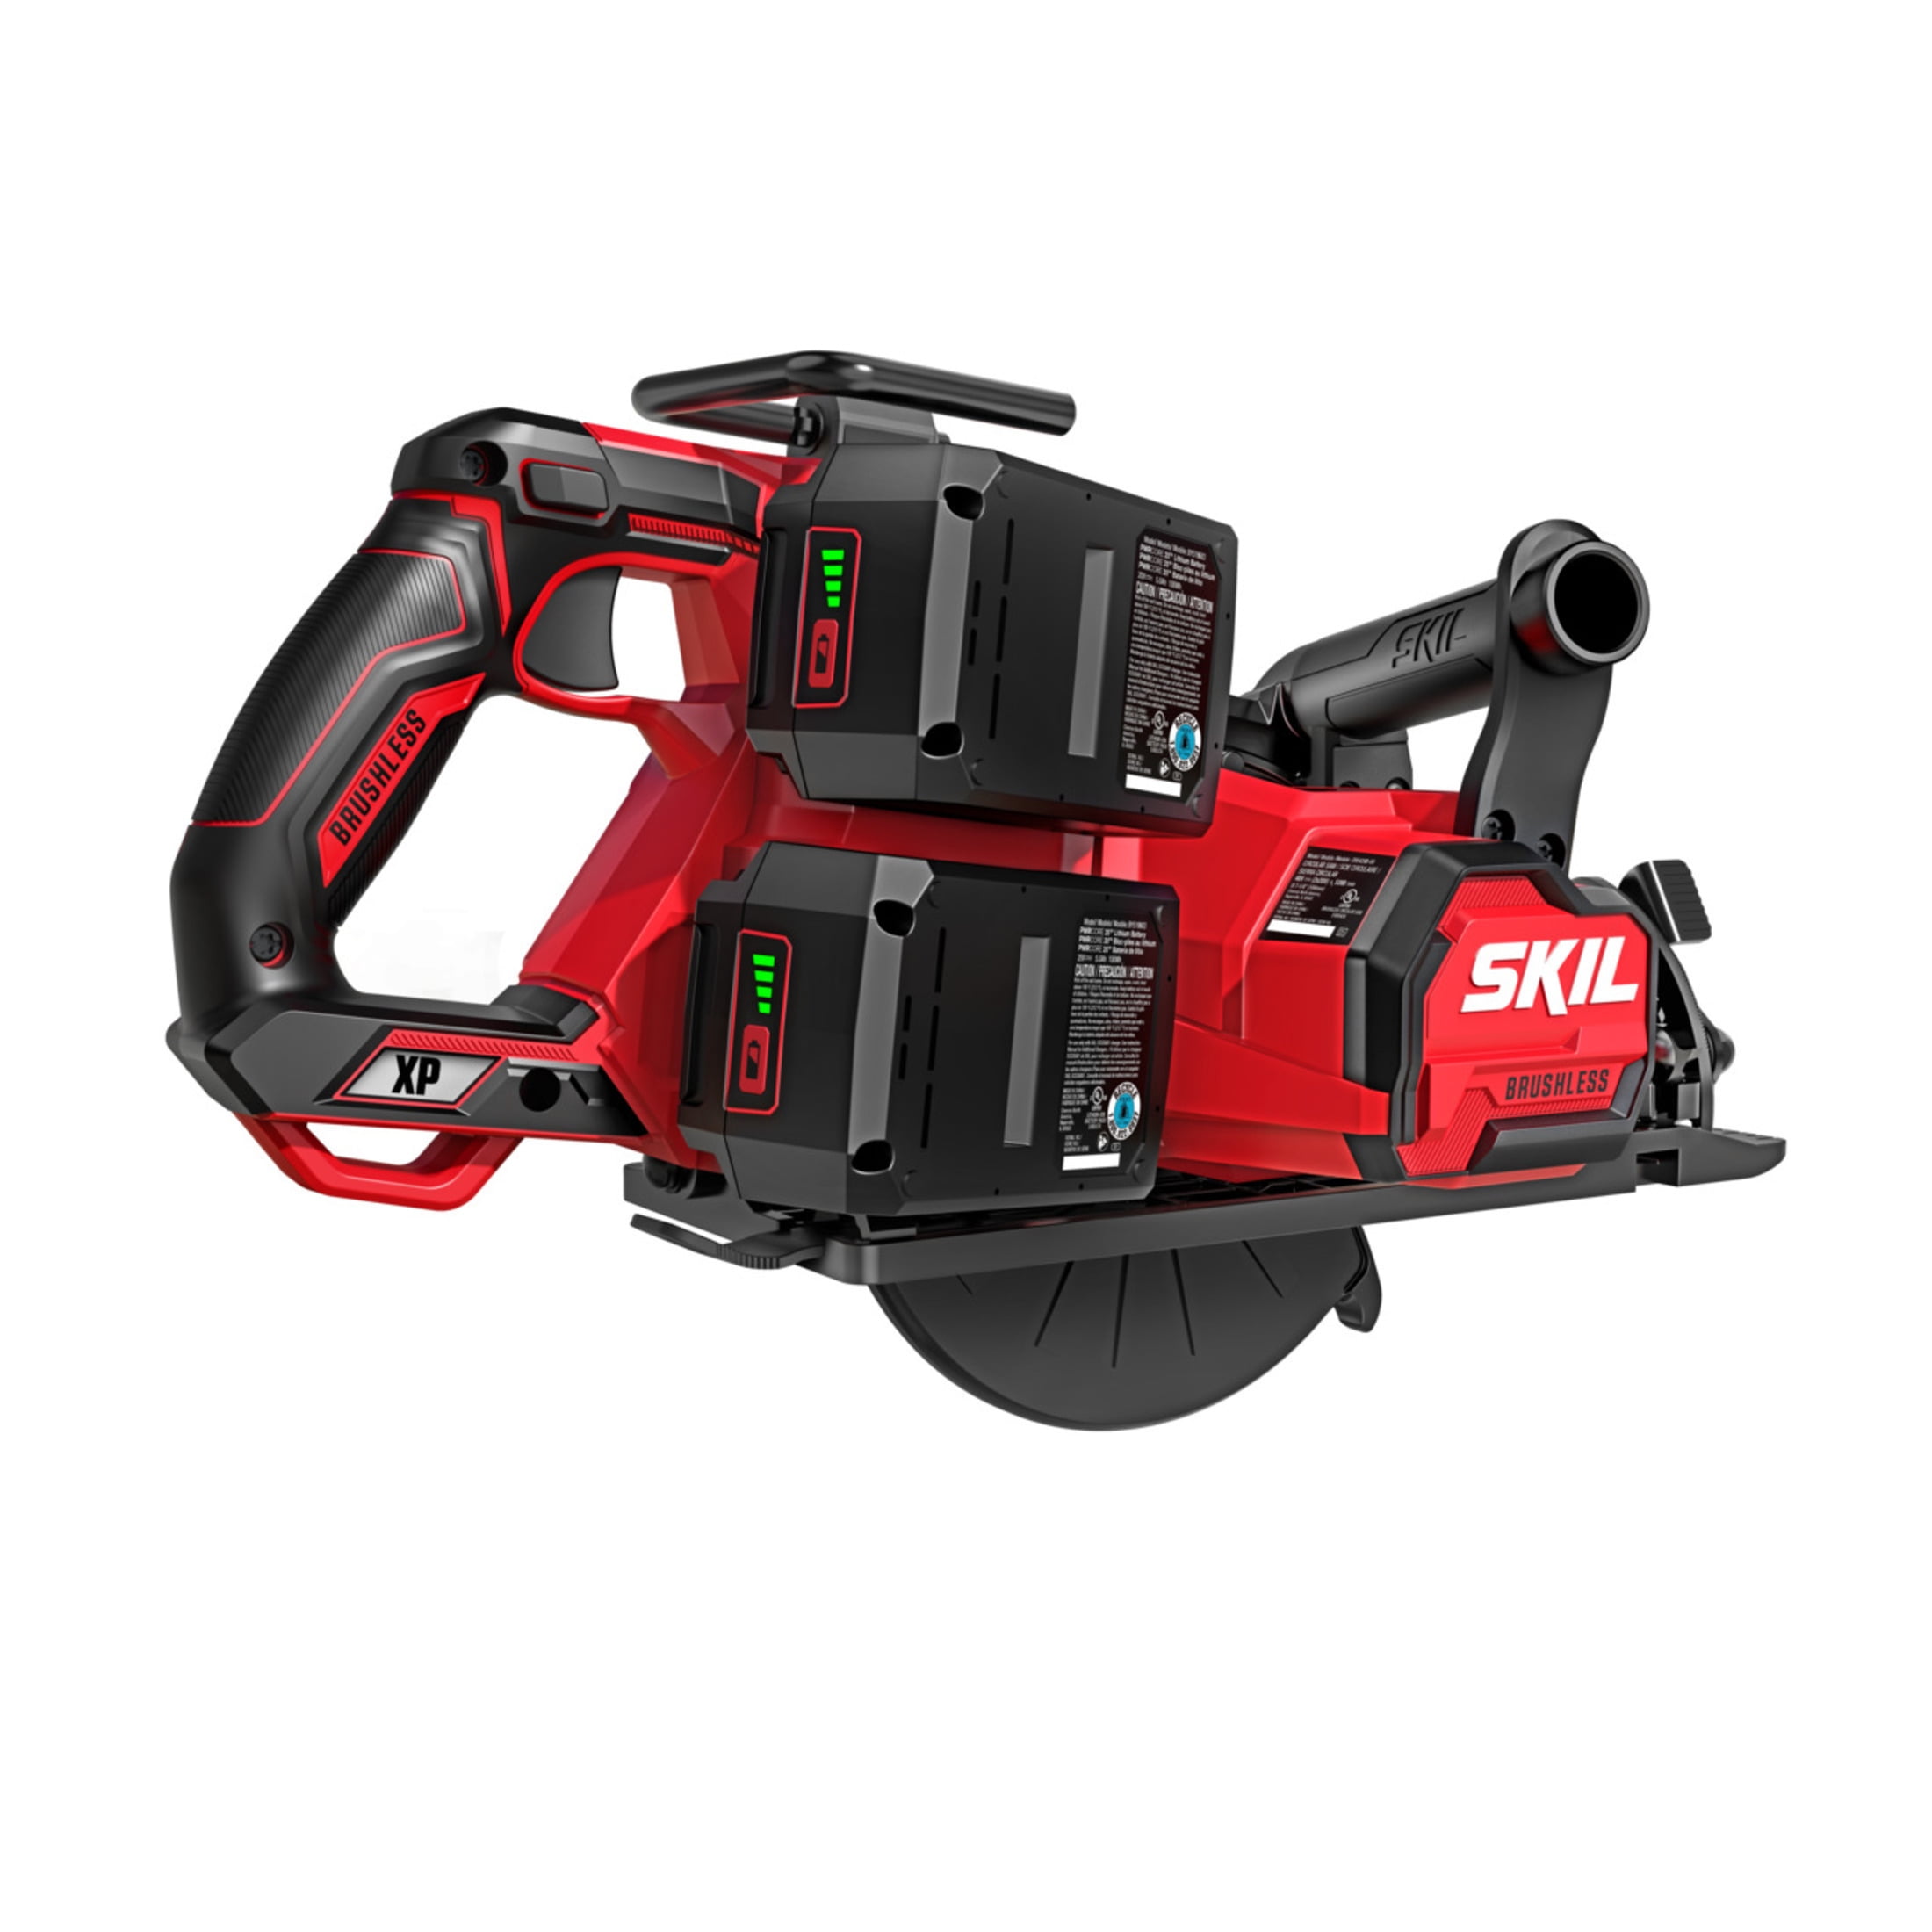 PWR CORE 20™ XP 2x20 Volt Brushless 7-1/4 IN. SKIL Rear Handle